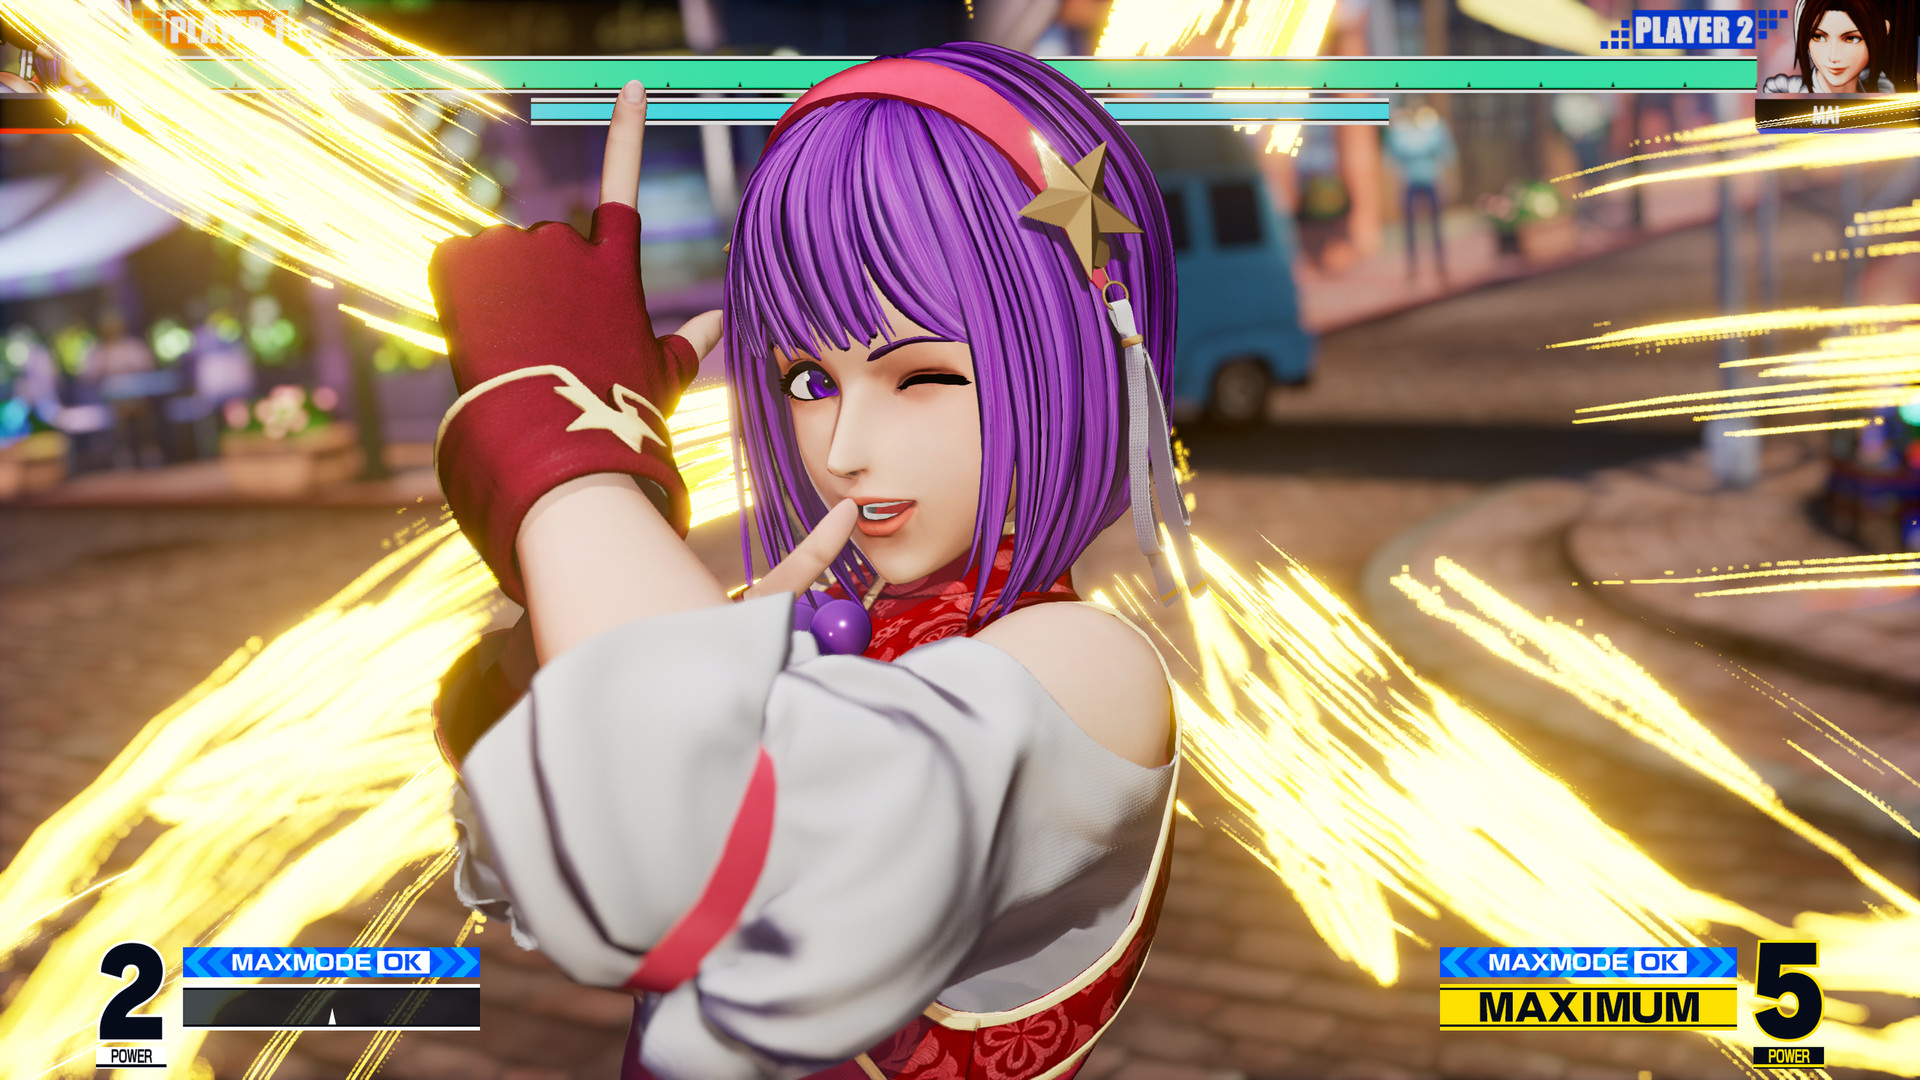 KOF XV review: Does King of Fighters 15 shatter expectations?